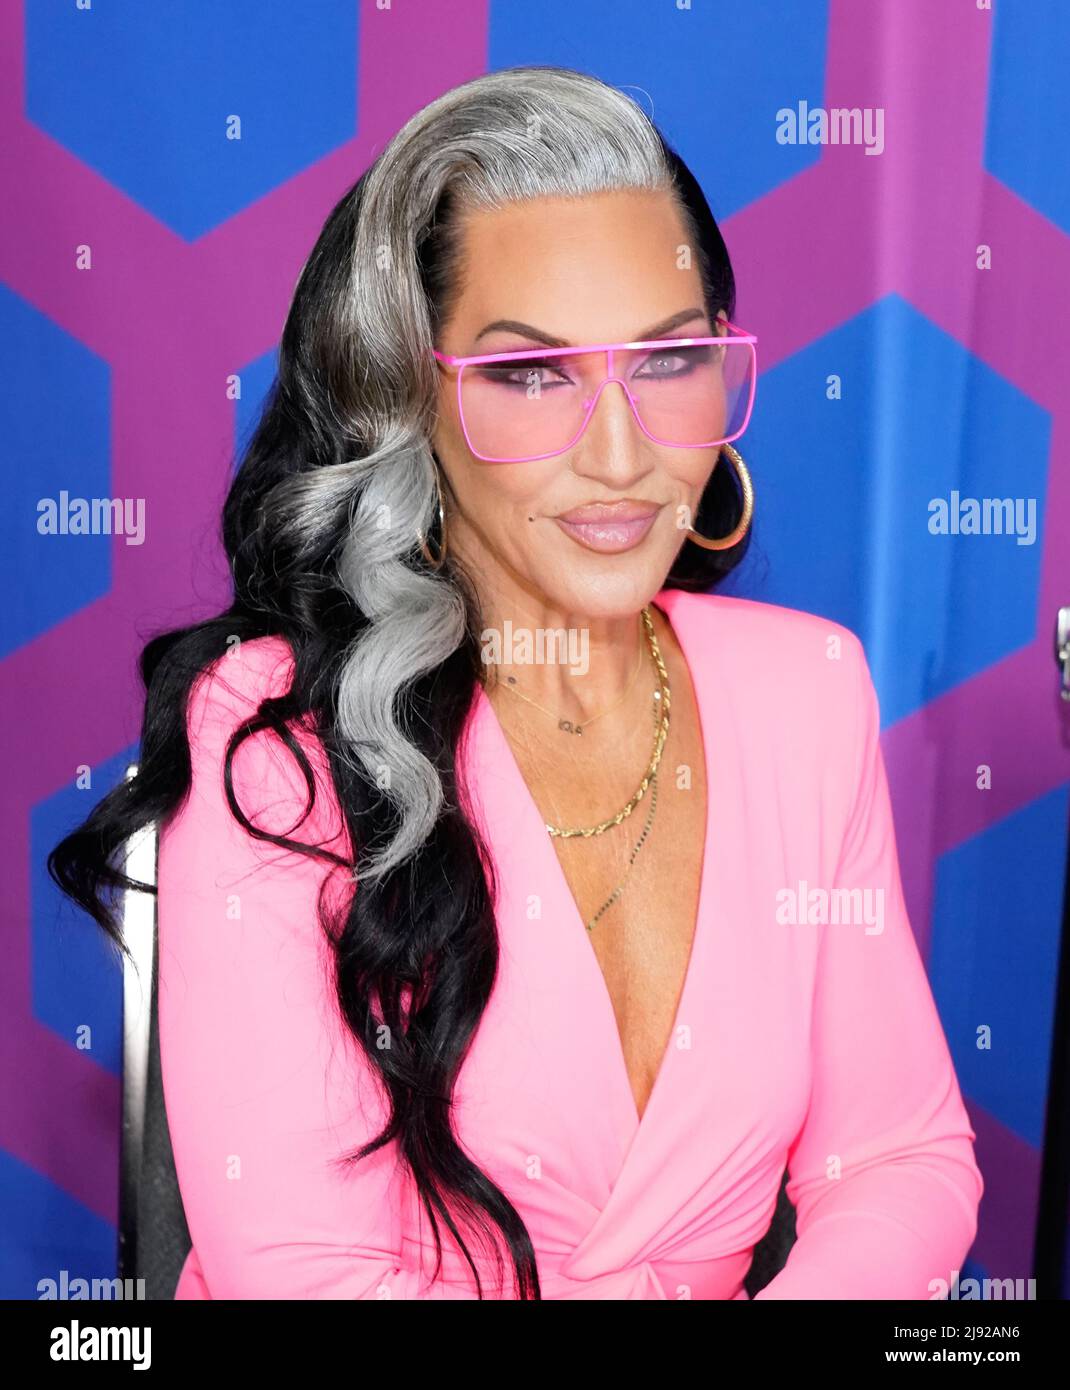 Michelle Visage during the 2022 RuPaul DragCon, Day 3, held at the LA  Convention Center in Los Angeles, California, Sunday, May 15, 2022. Photo  by Jennifer Graylock-Graylock.com Stock Photo - Alamy